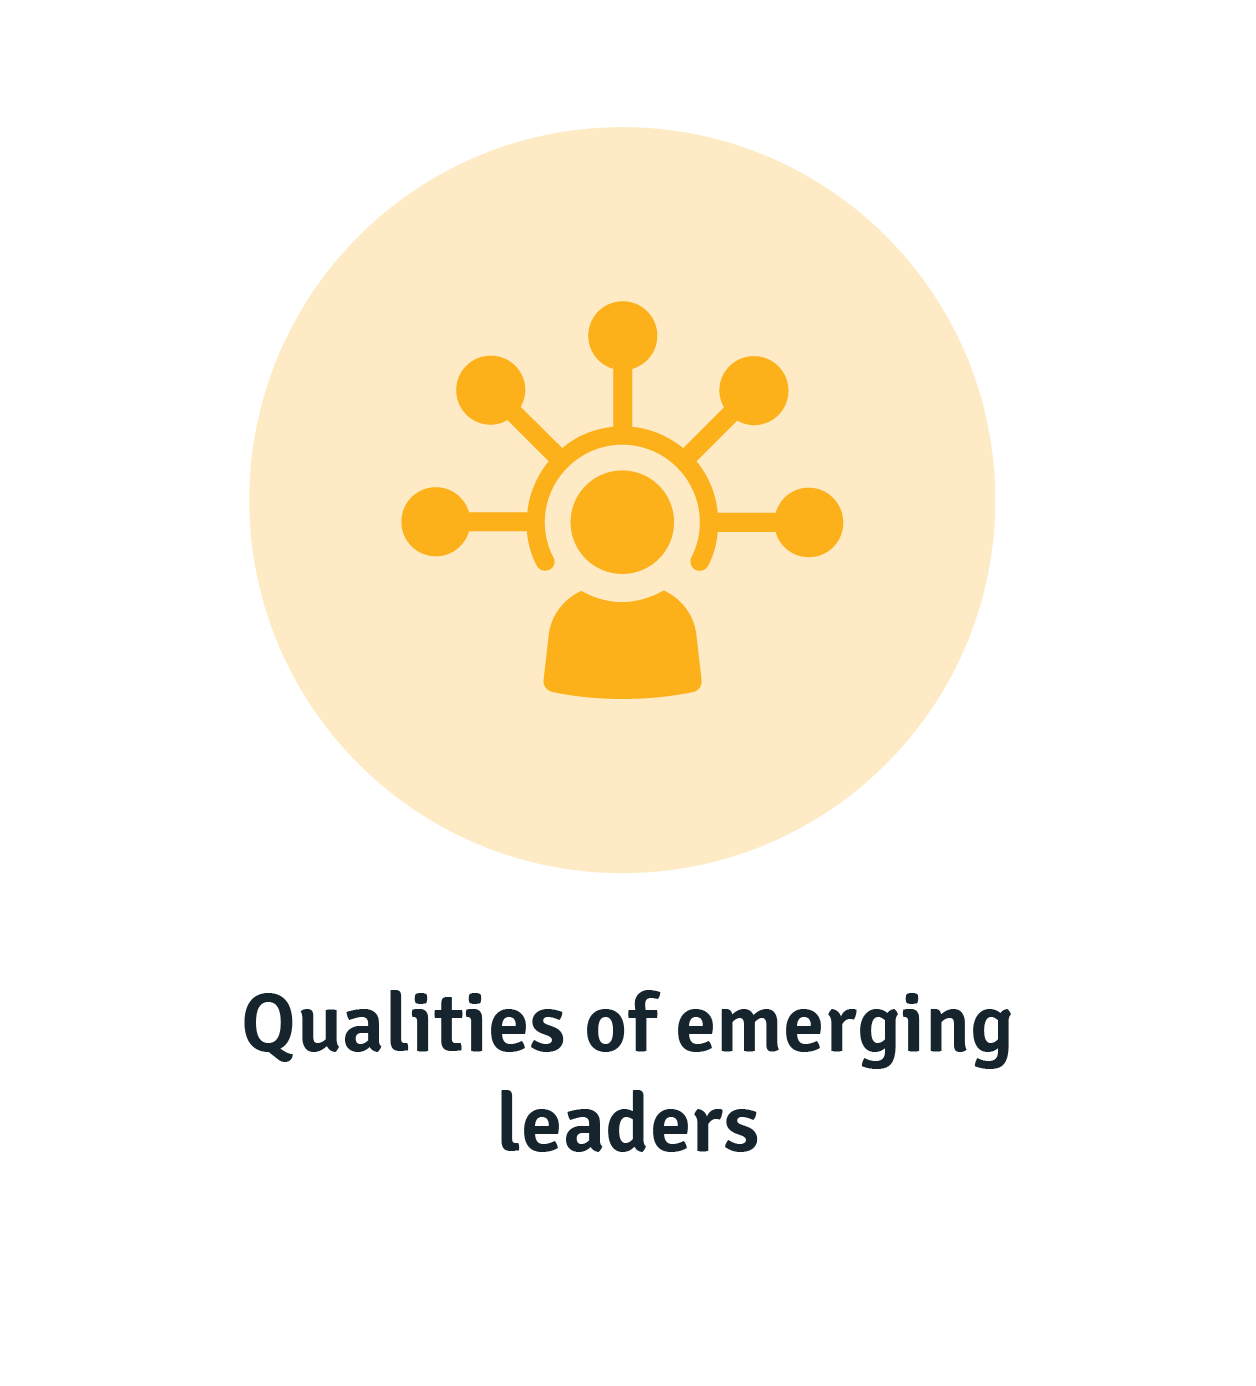 Qualities of emerging leaders to identify